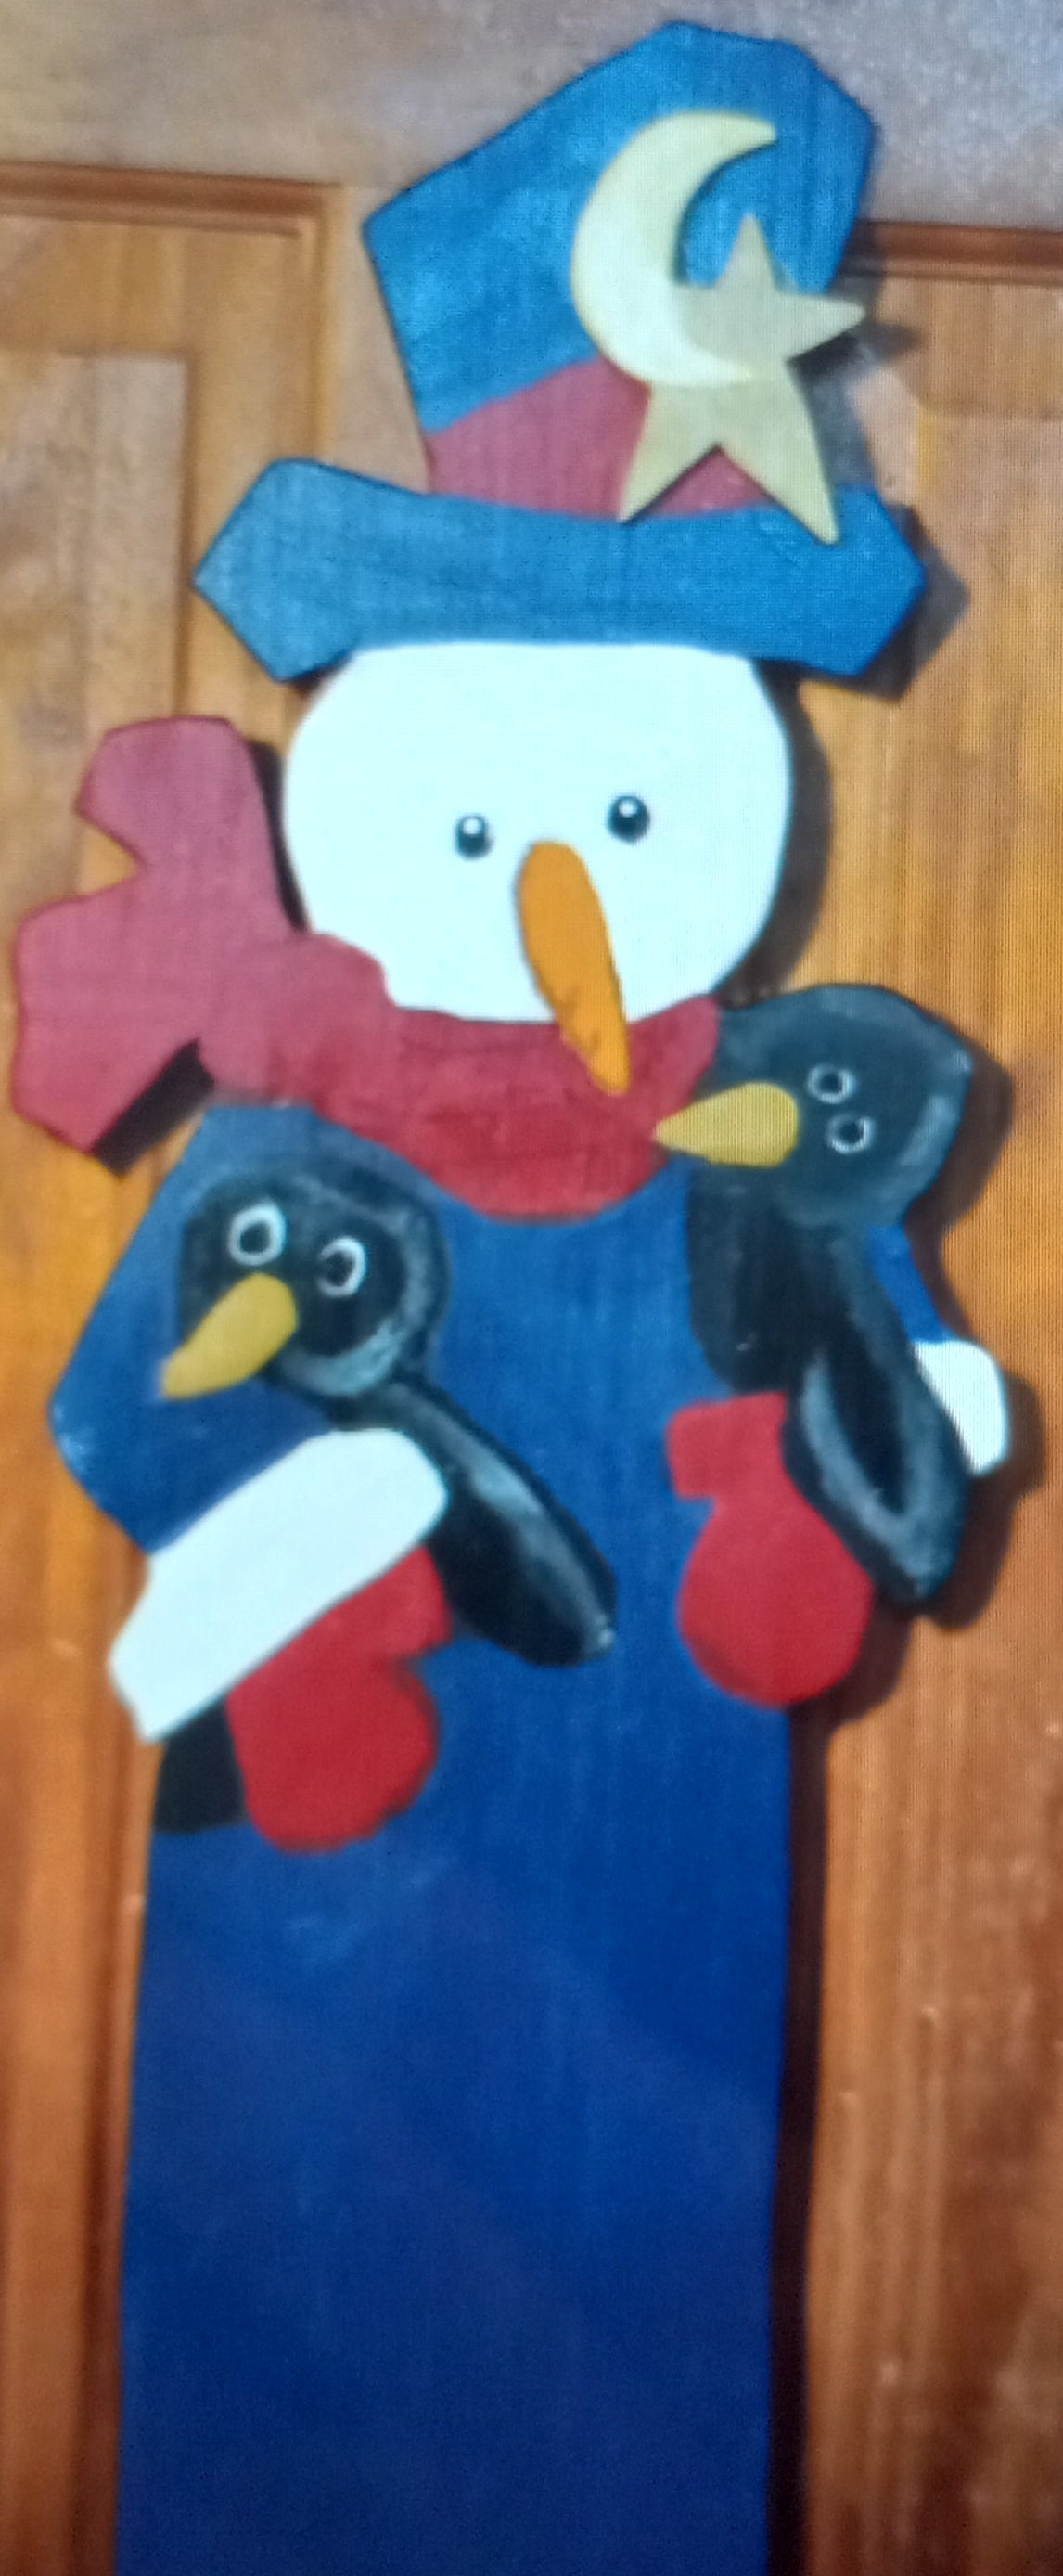 Snowman with Two penquins